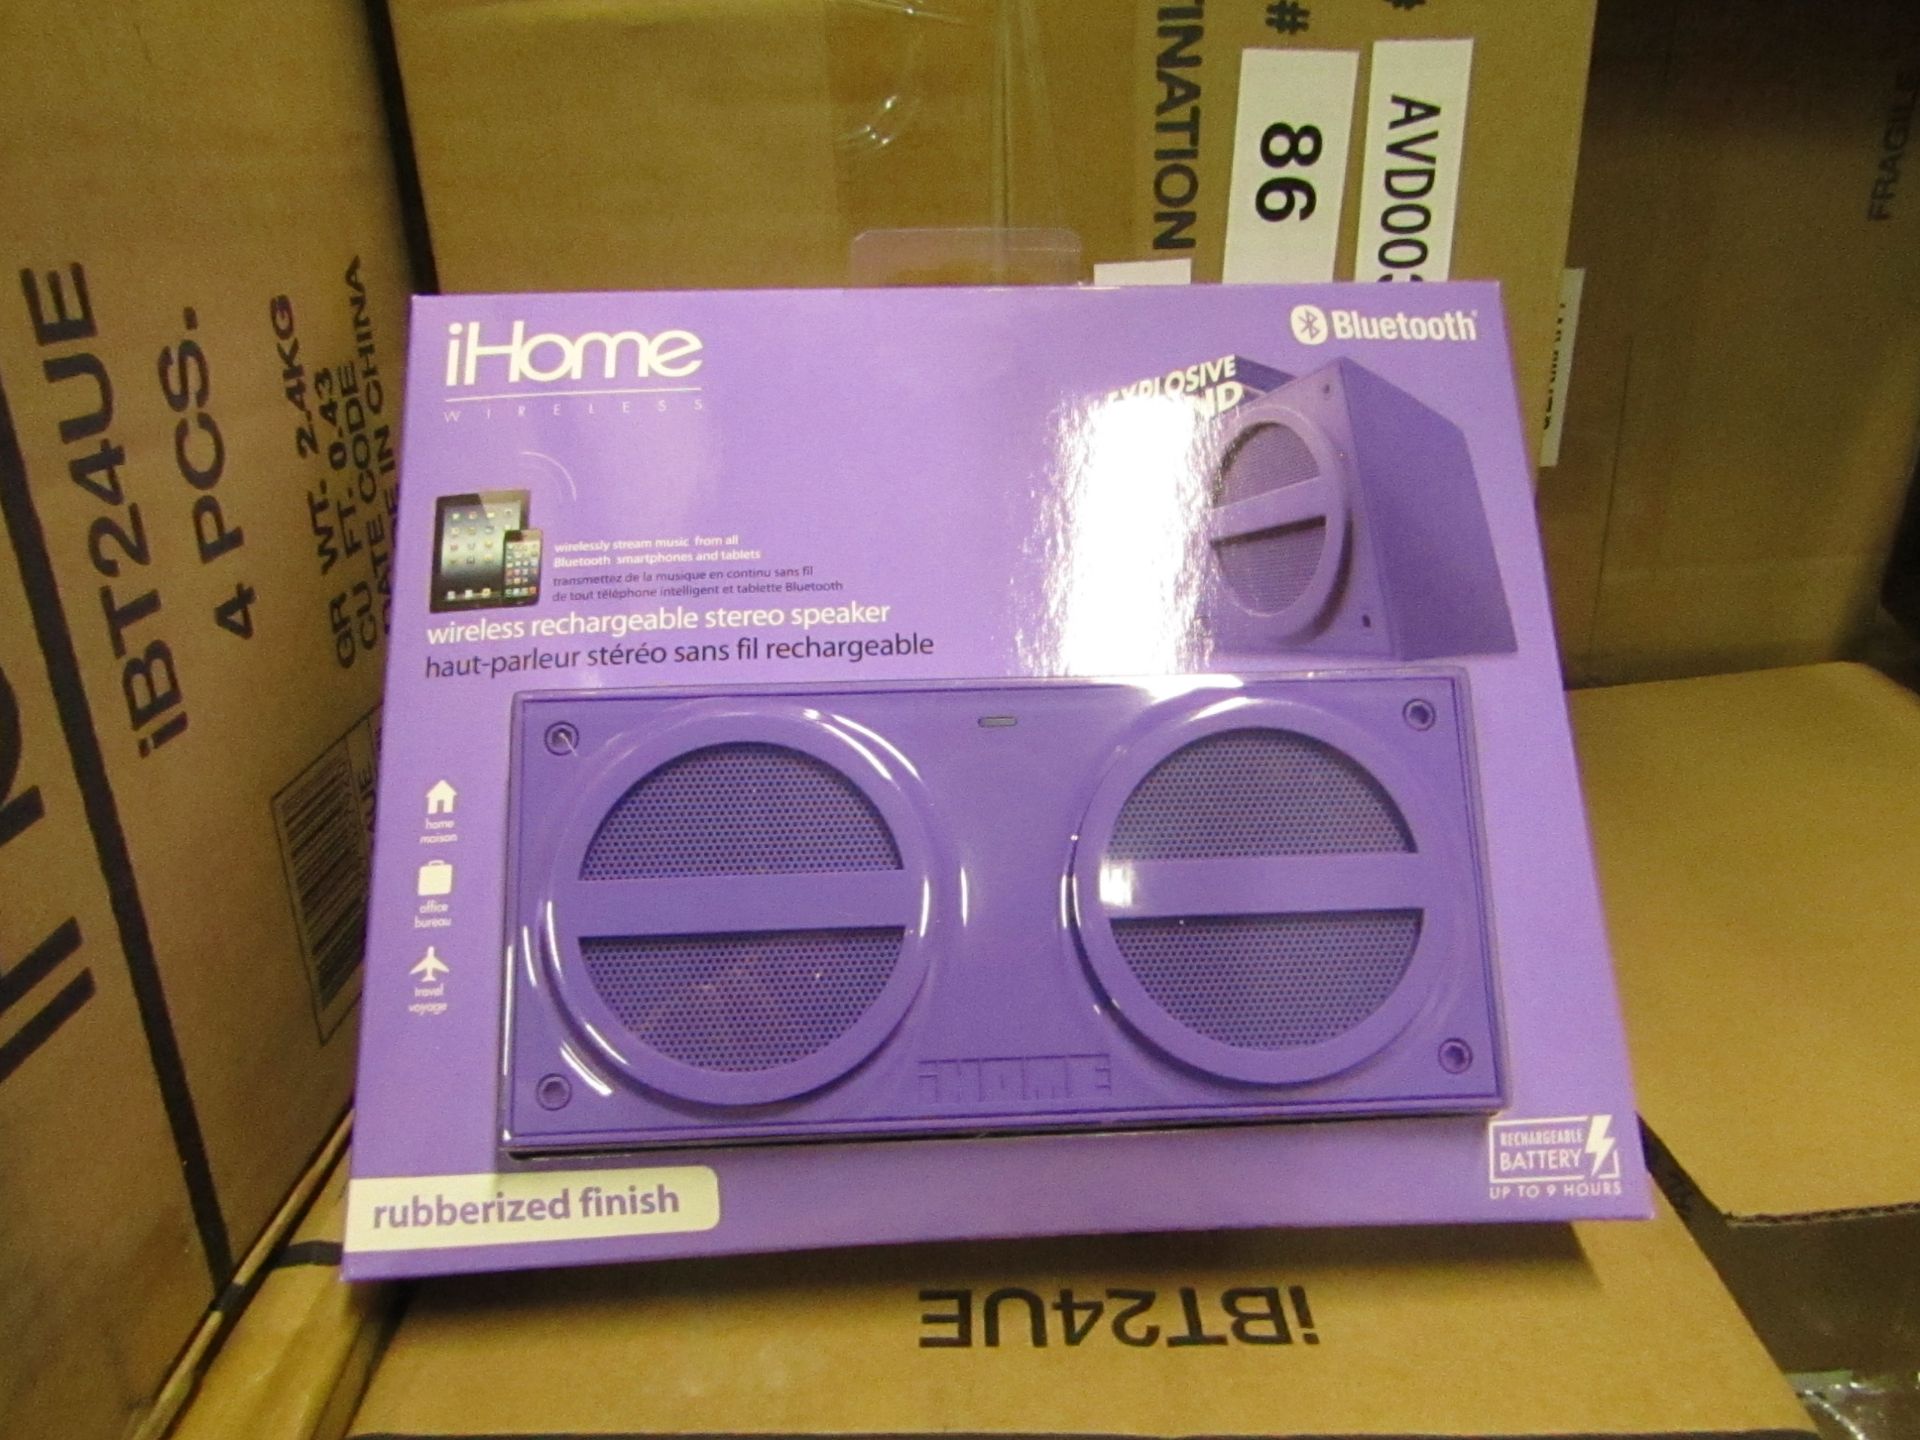 Ihome wireless rechargeable stereo speaker - New & Packaged